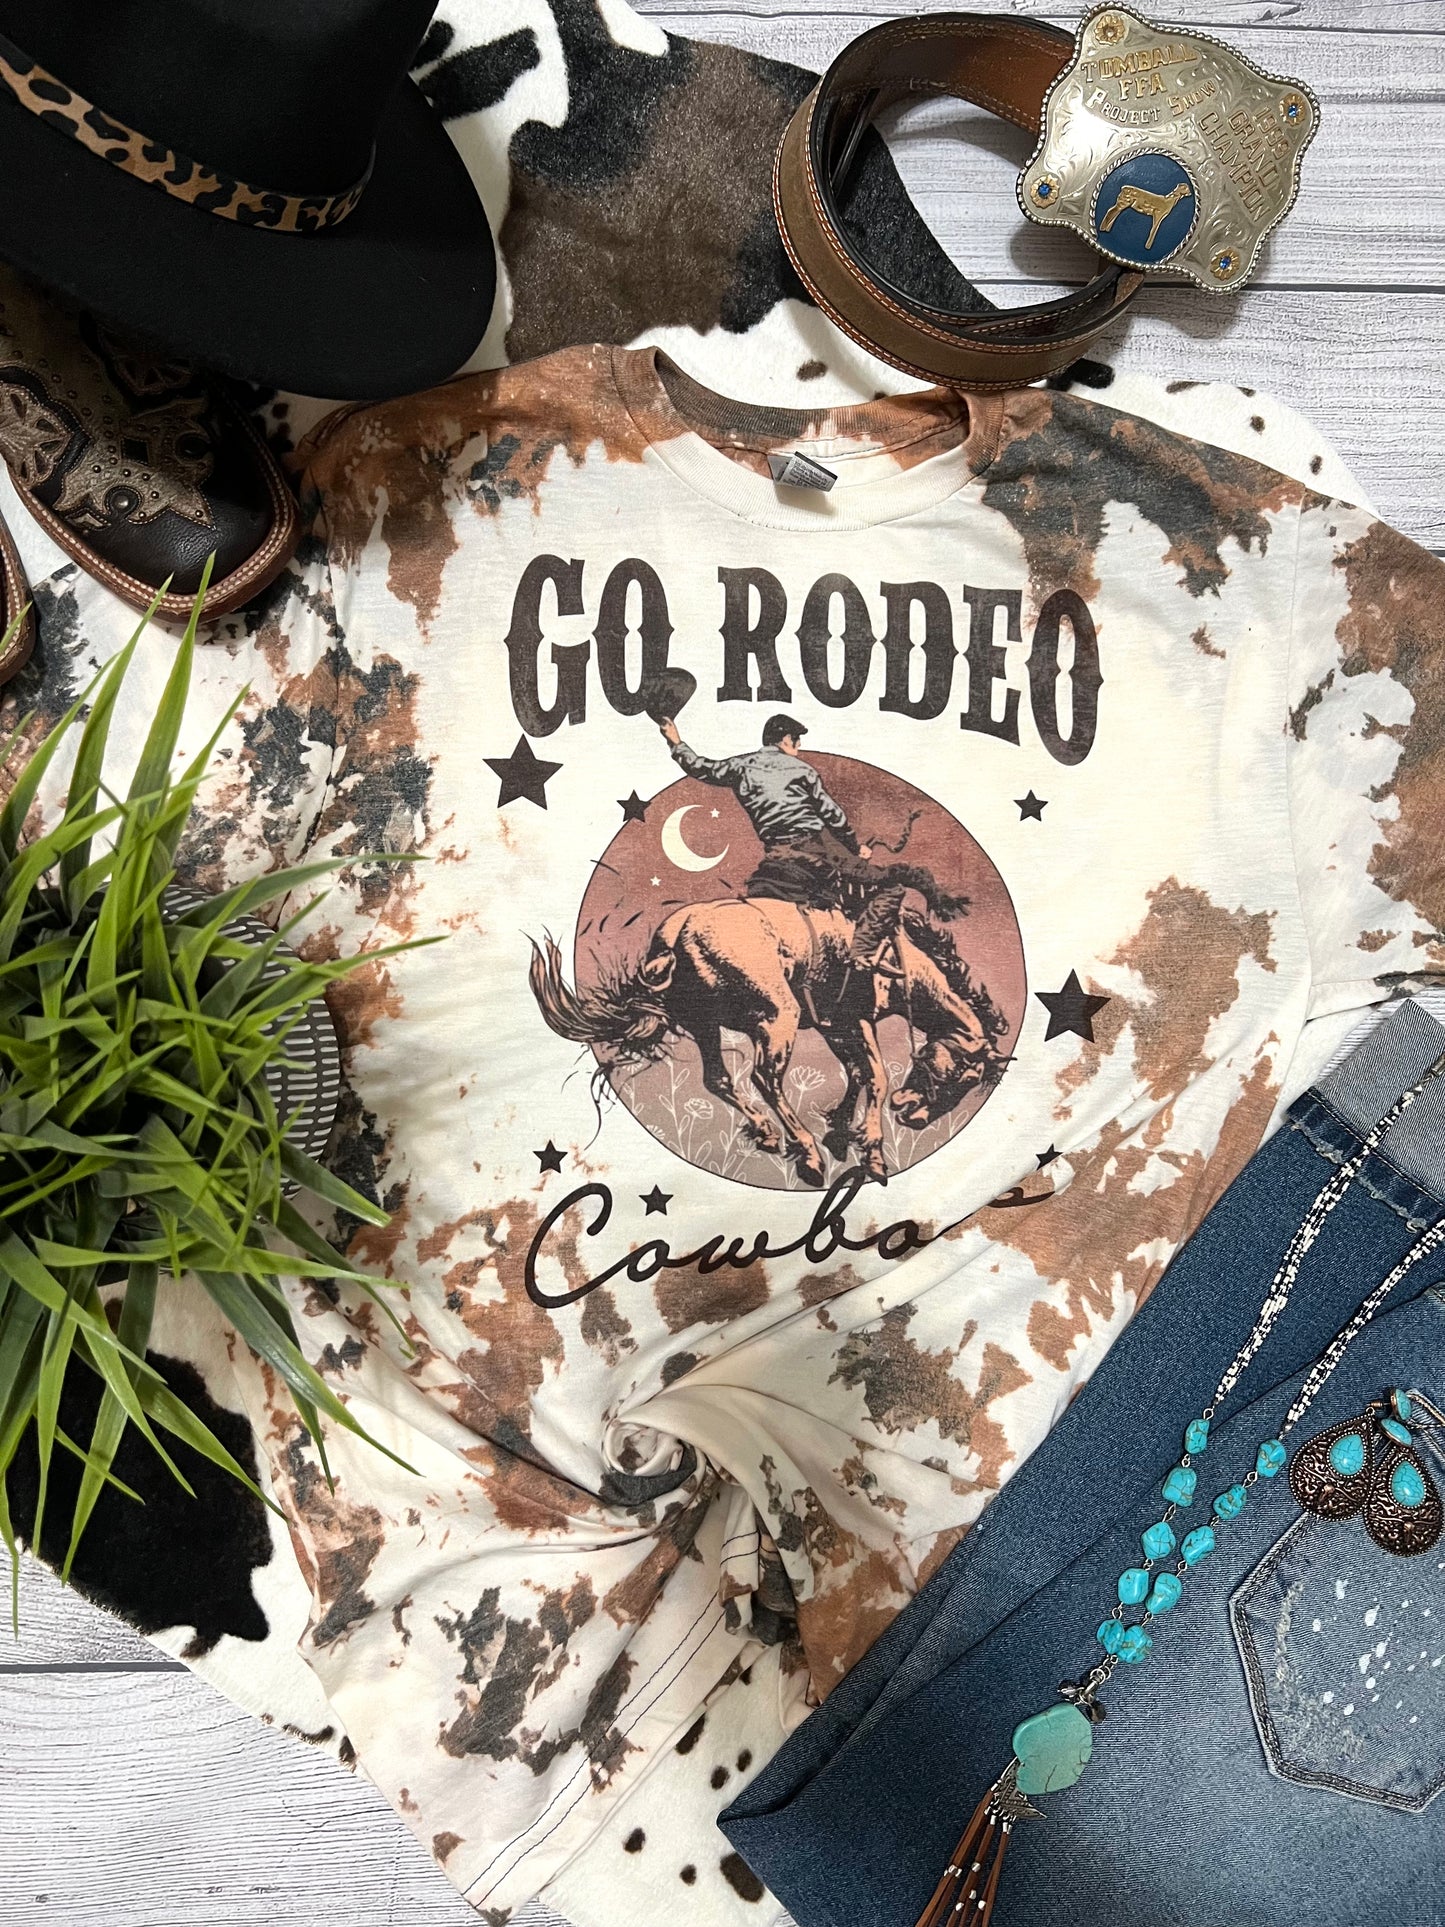 Go Rodeo Bleached Cowhide Shirt